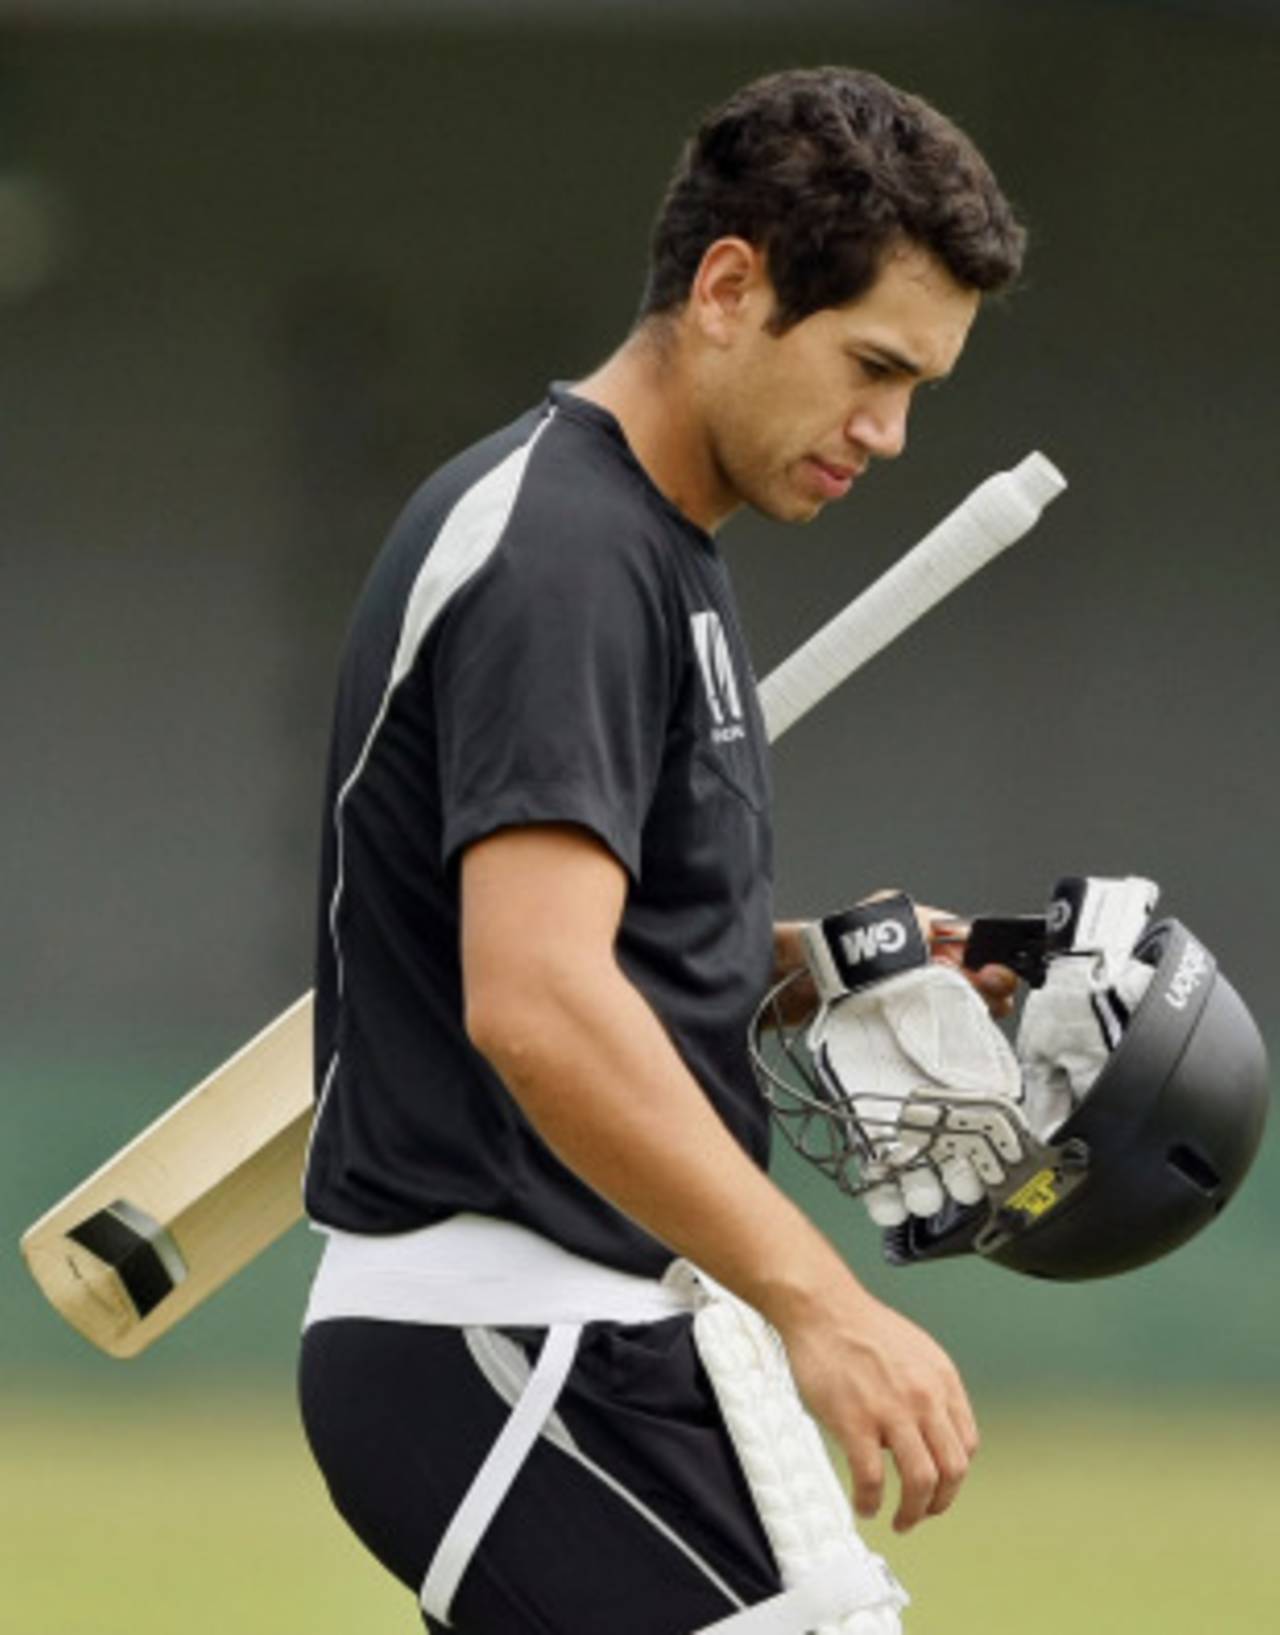 Ross Taylor at New Zealand's practice session, World Cup 2011, Colombo, March 27 2011